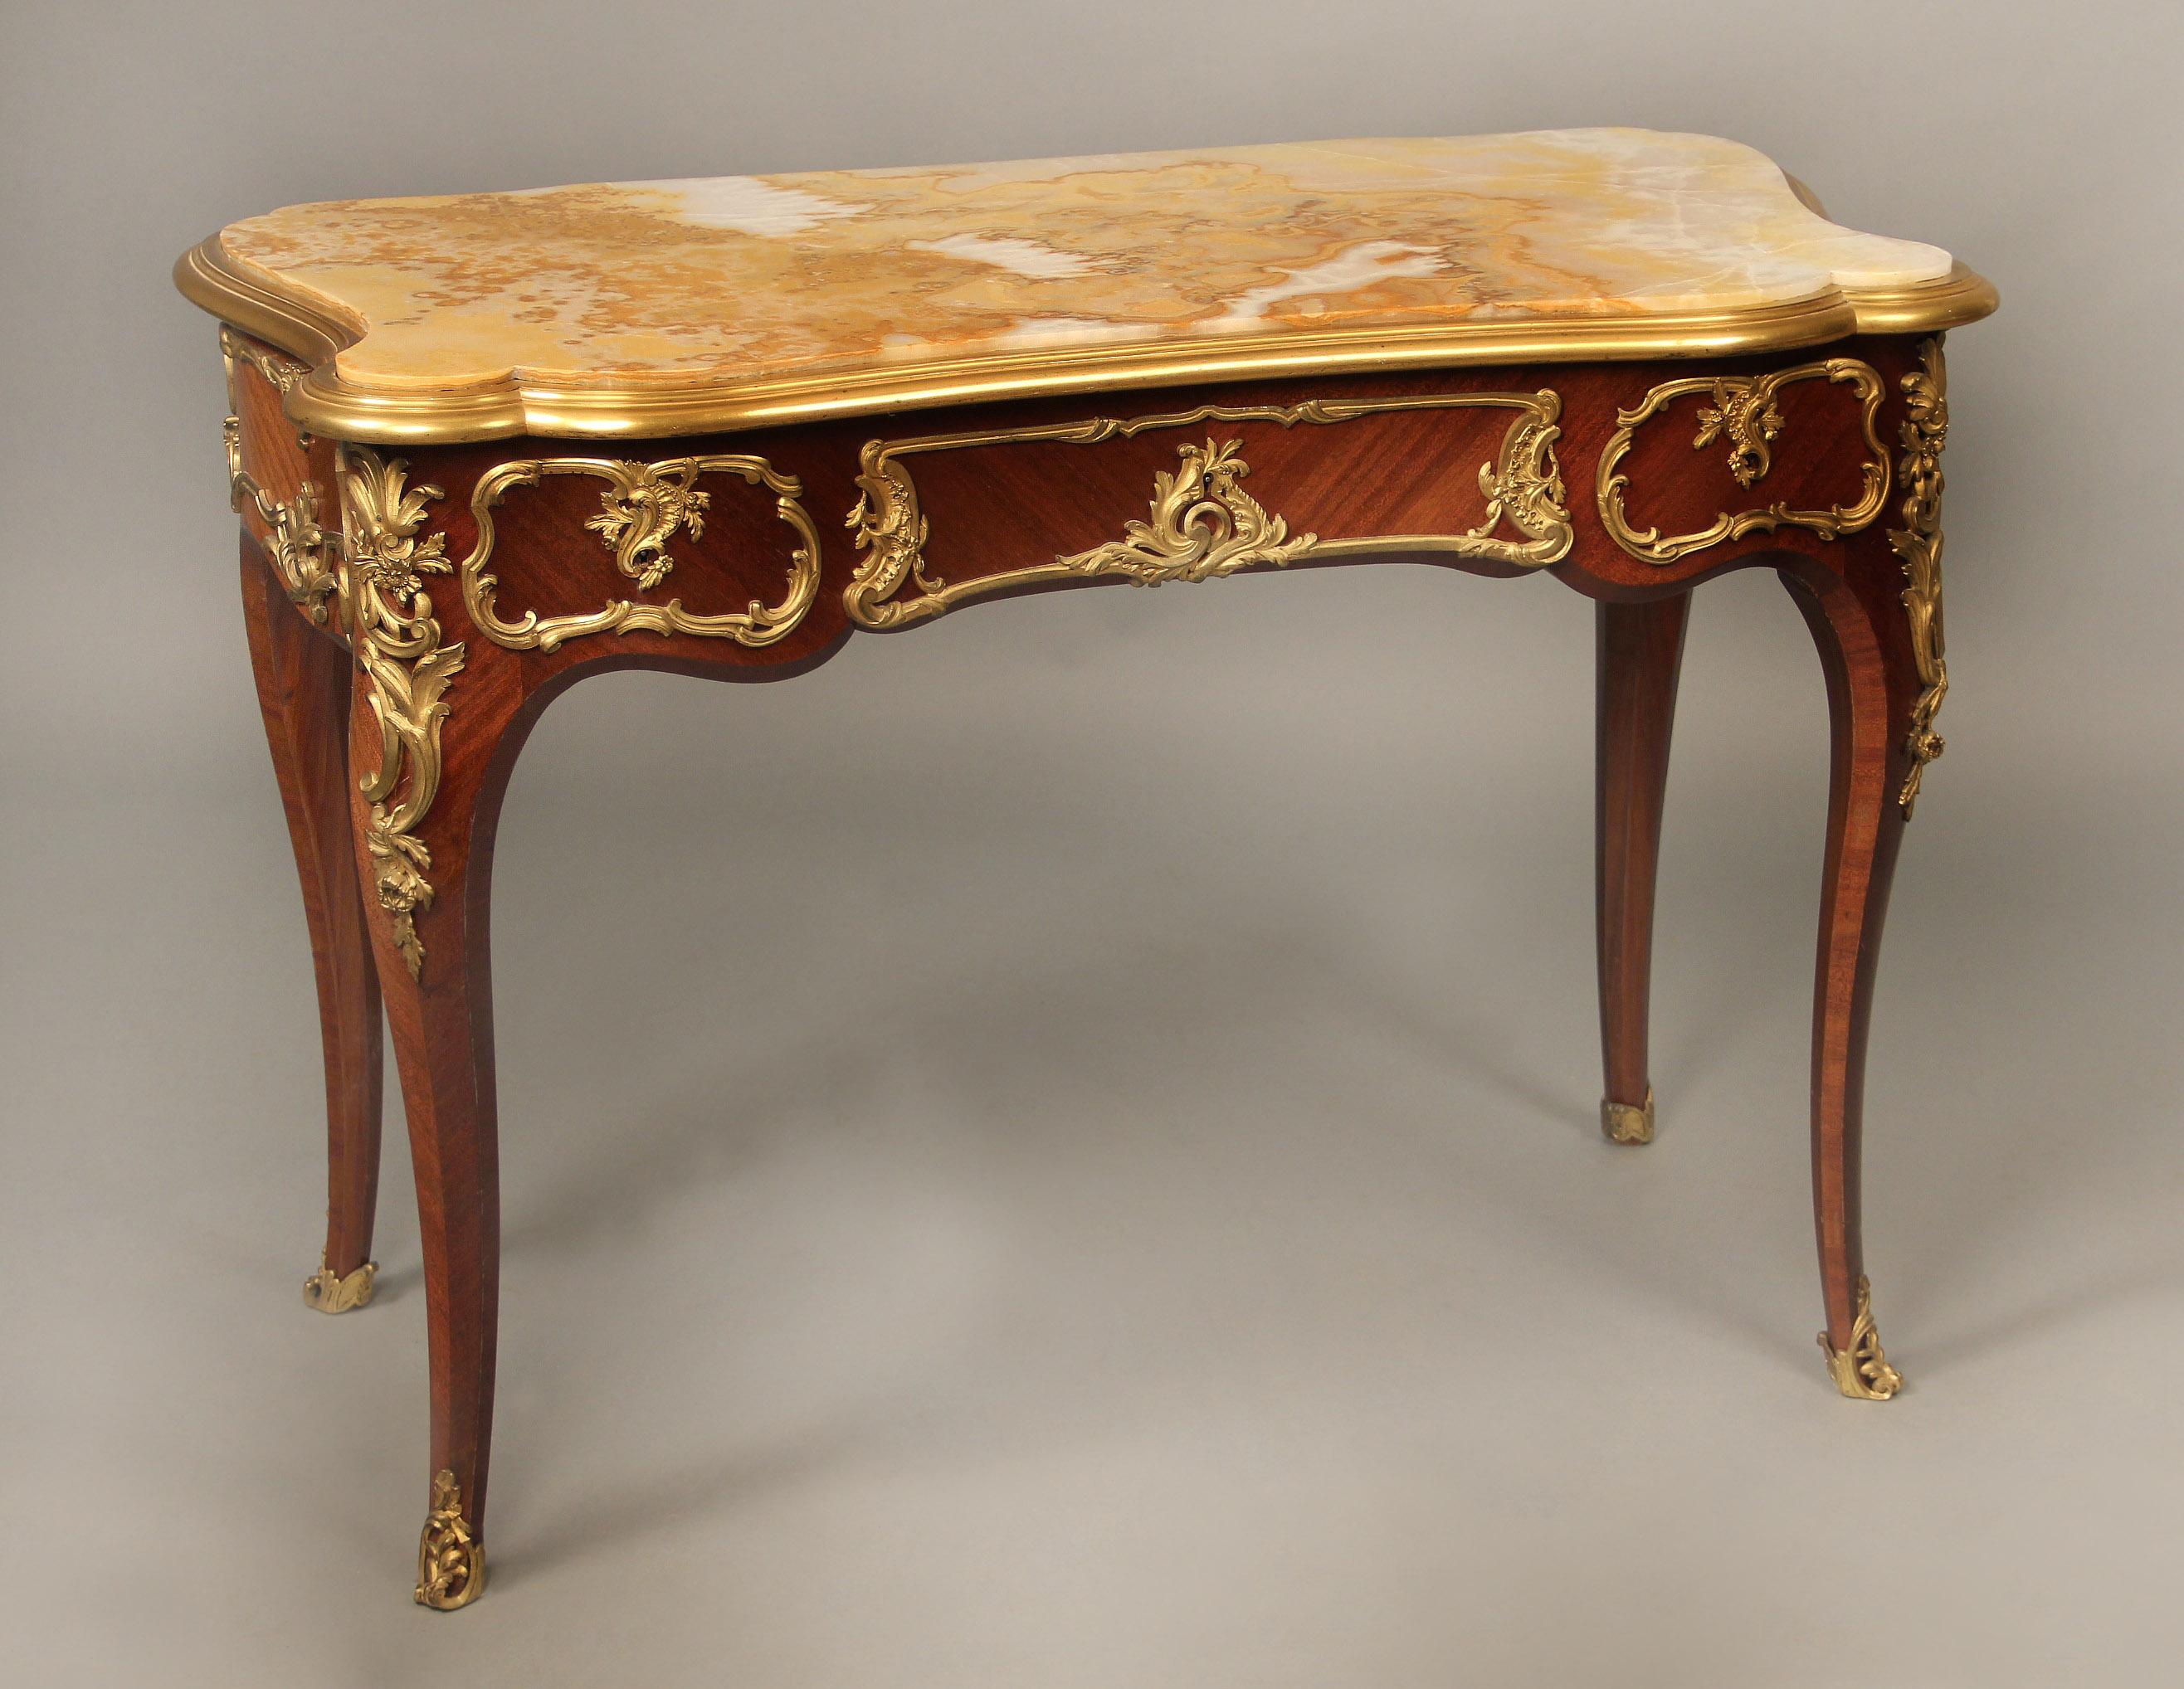 An Interesting Late 19th century Gilt Bronze Mounted Louis XV style onyx top side table By Henry Dasson

Henry Dasson

The beautiful shaped onyx top within a bronze rim, above a long centered and two small side drawers, the backside similarly